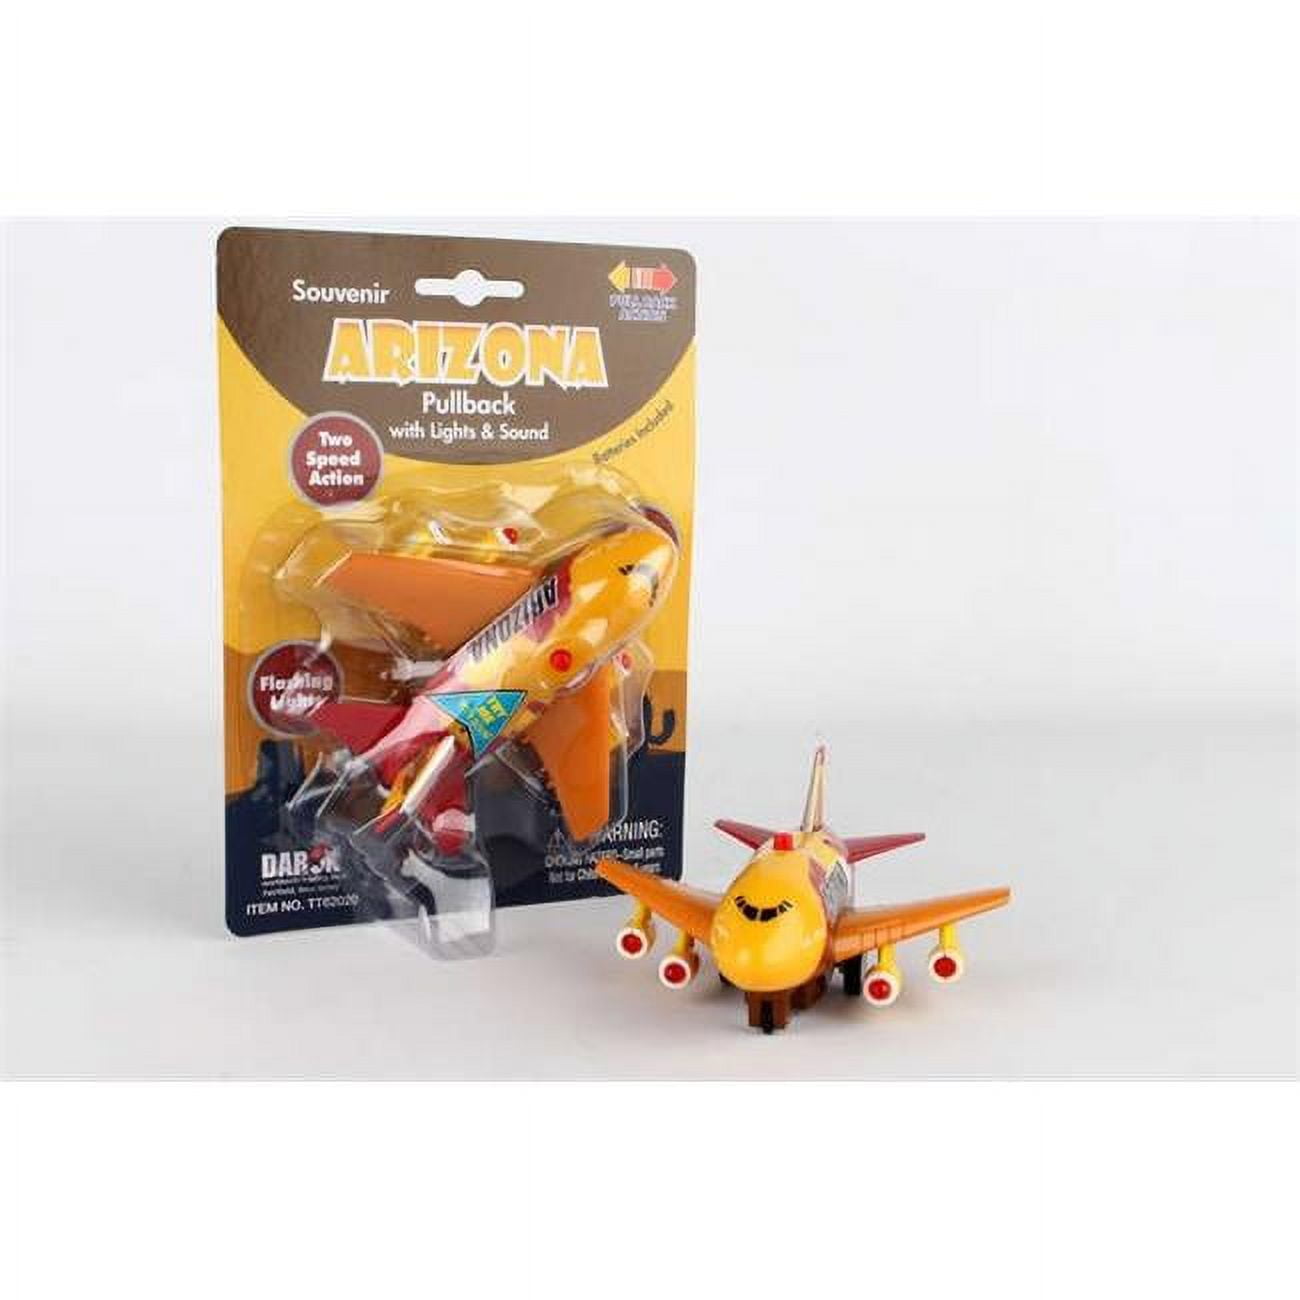 Picture of Toytech TT62020 Arizona Pullback with Light & Sound Toy Airplane